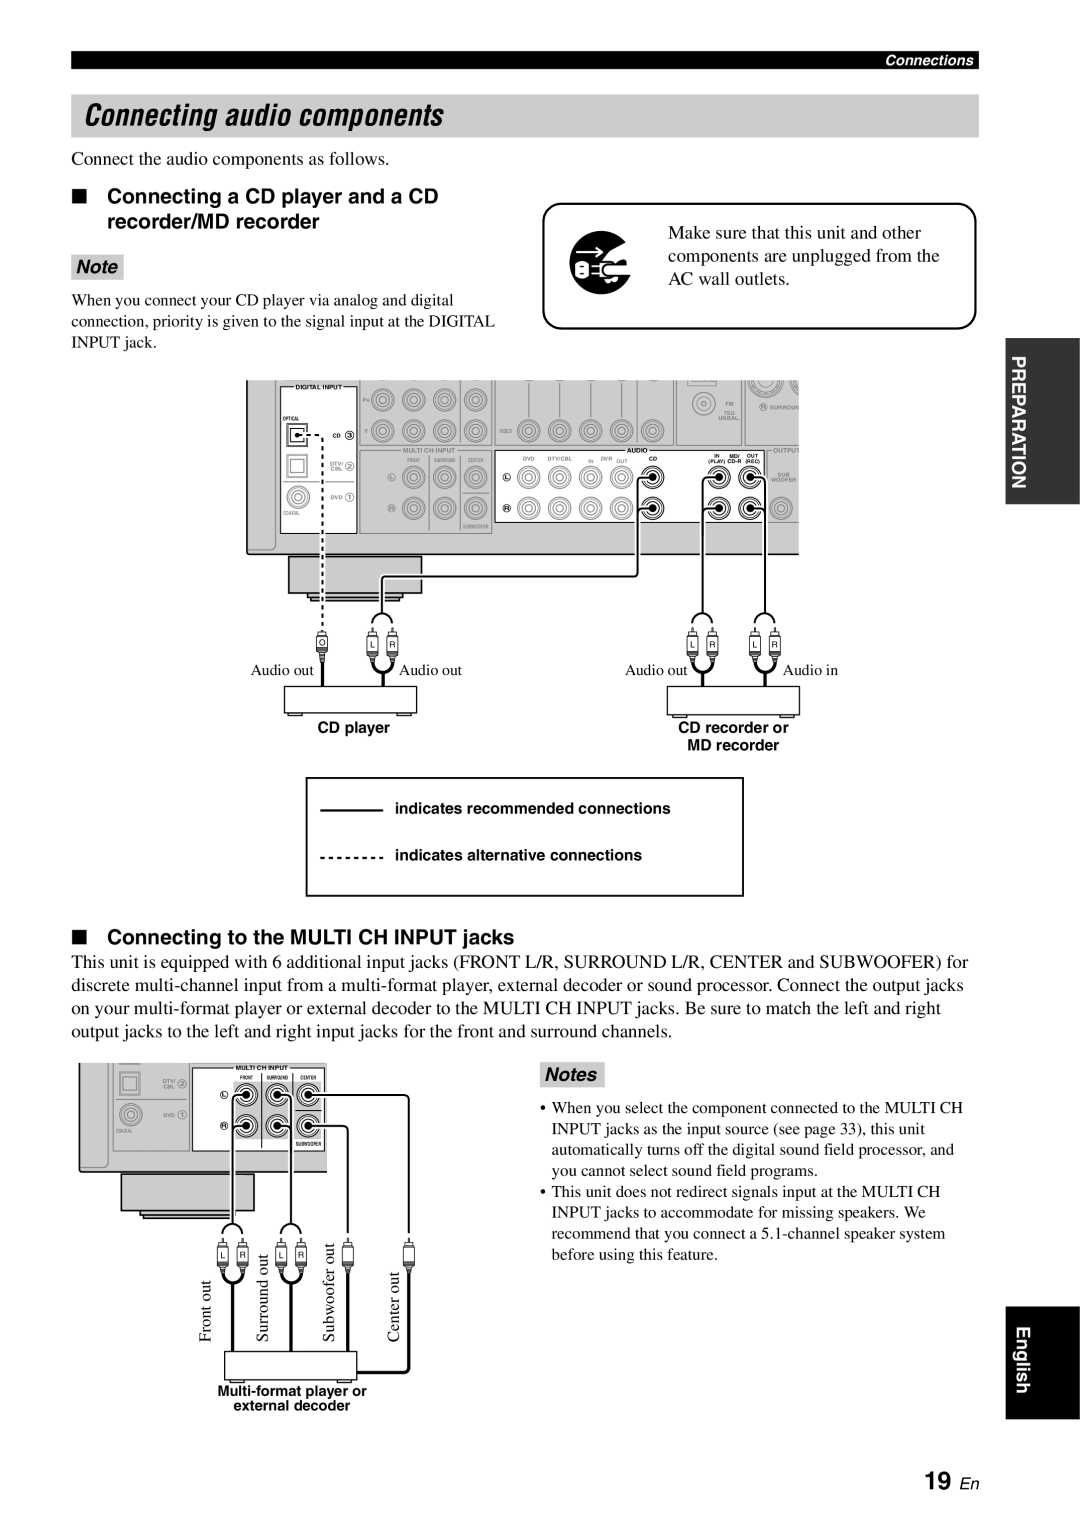 Yamaha RX-V561 owner manual Connecting audio components, 19 En, Connecting to the MULTI CH INPUT jacks, Notes 